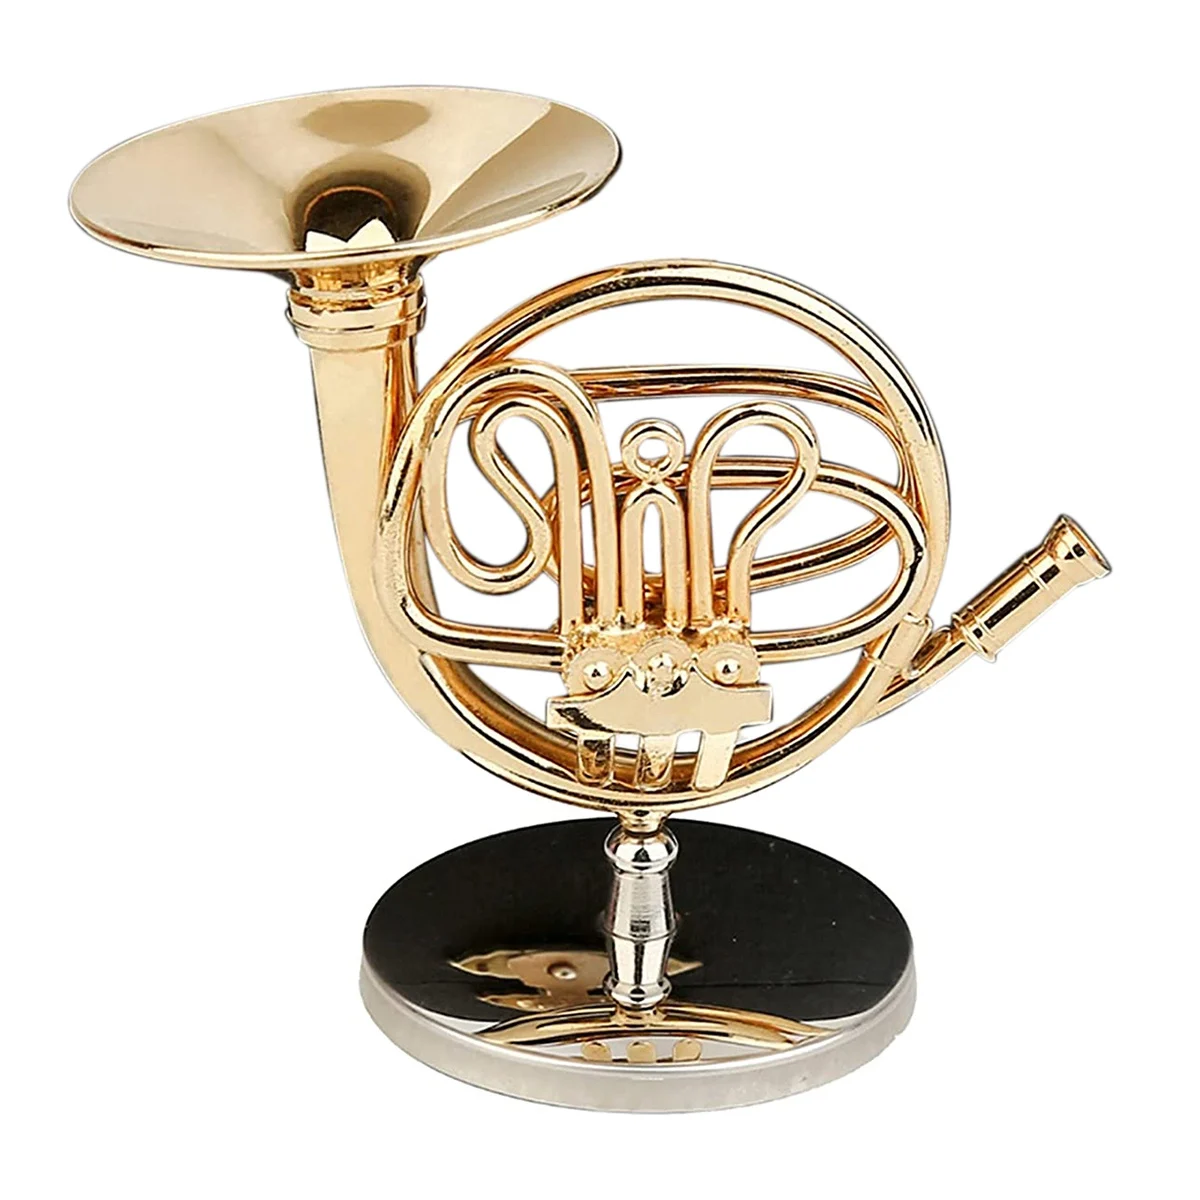 

10cm Miniature Pure Copper Trombone Model with Support Mini Musical Instrument Model with Black Leather Box